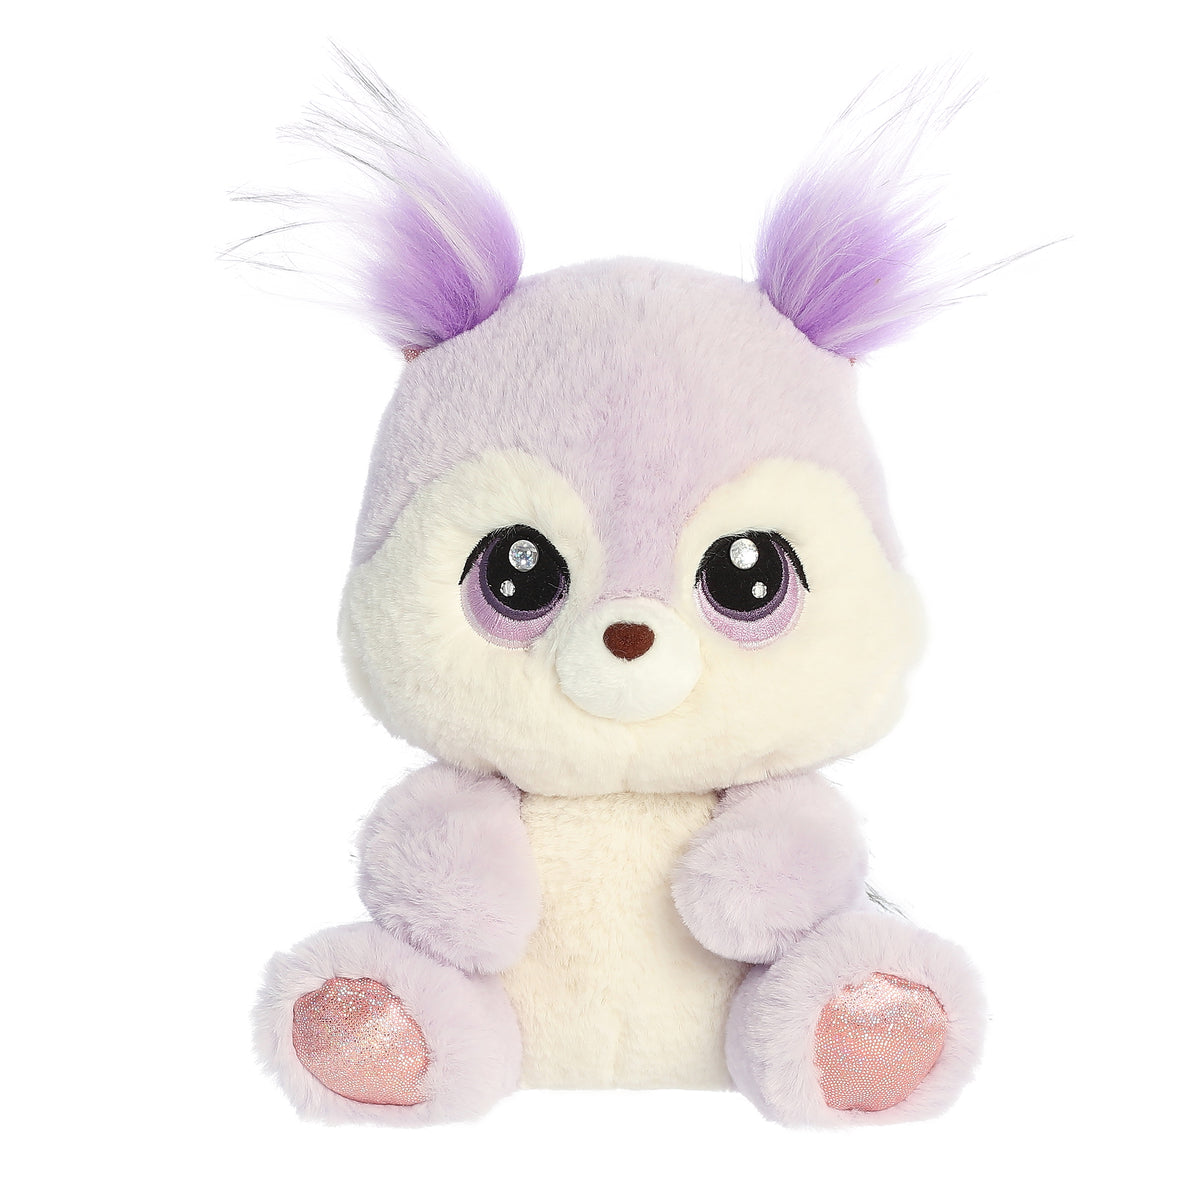 Lavender Squirrel plush with sparkling footpads, jeweled eyes, and a bushy tail from Aurora's Enchanted collection